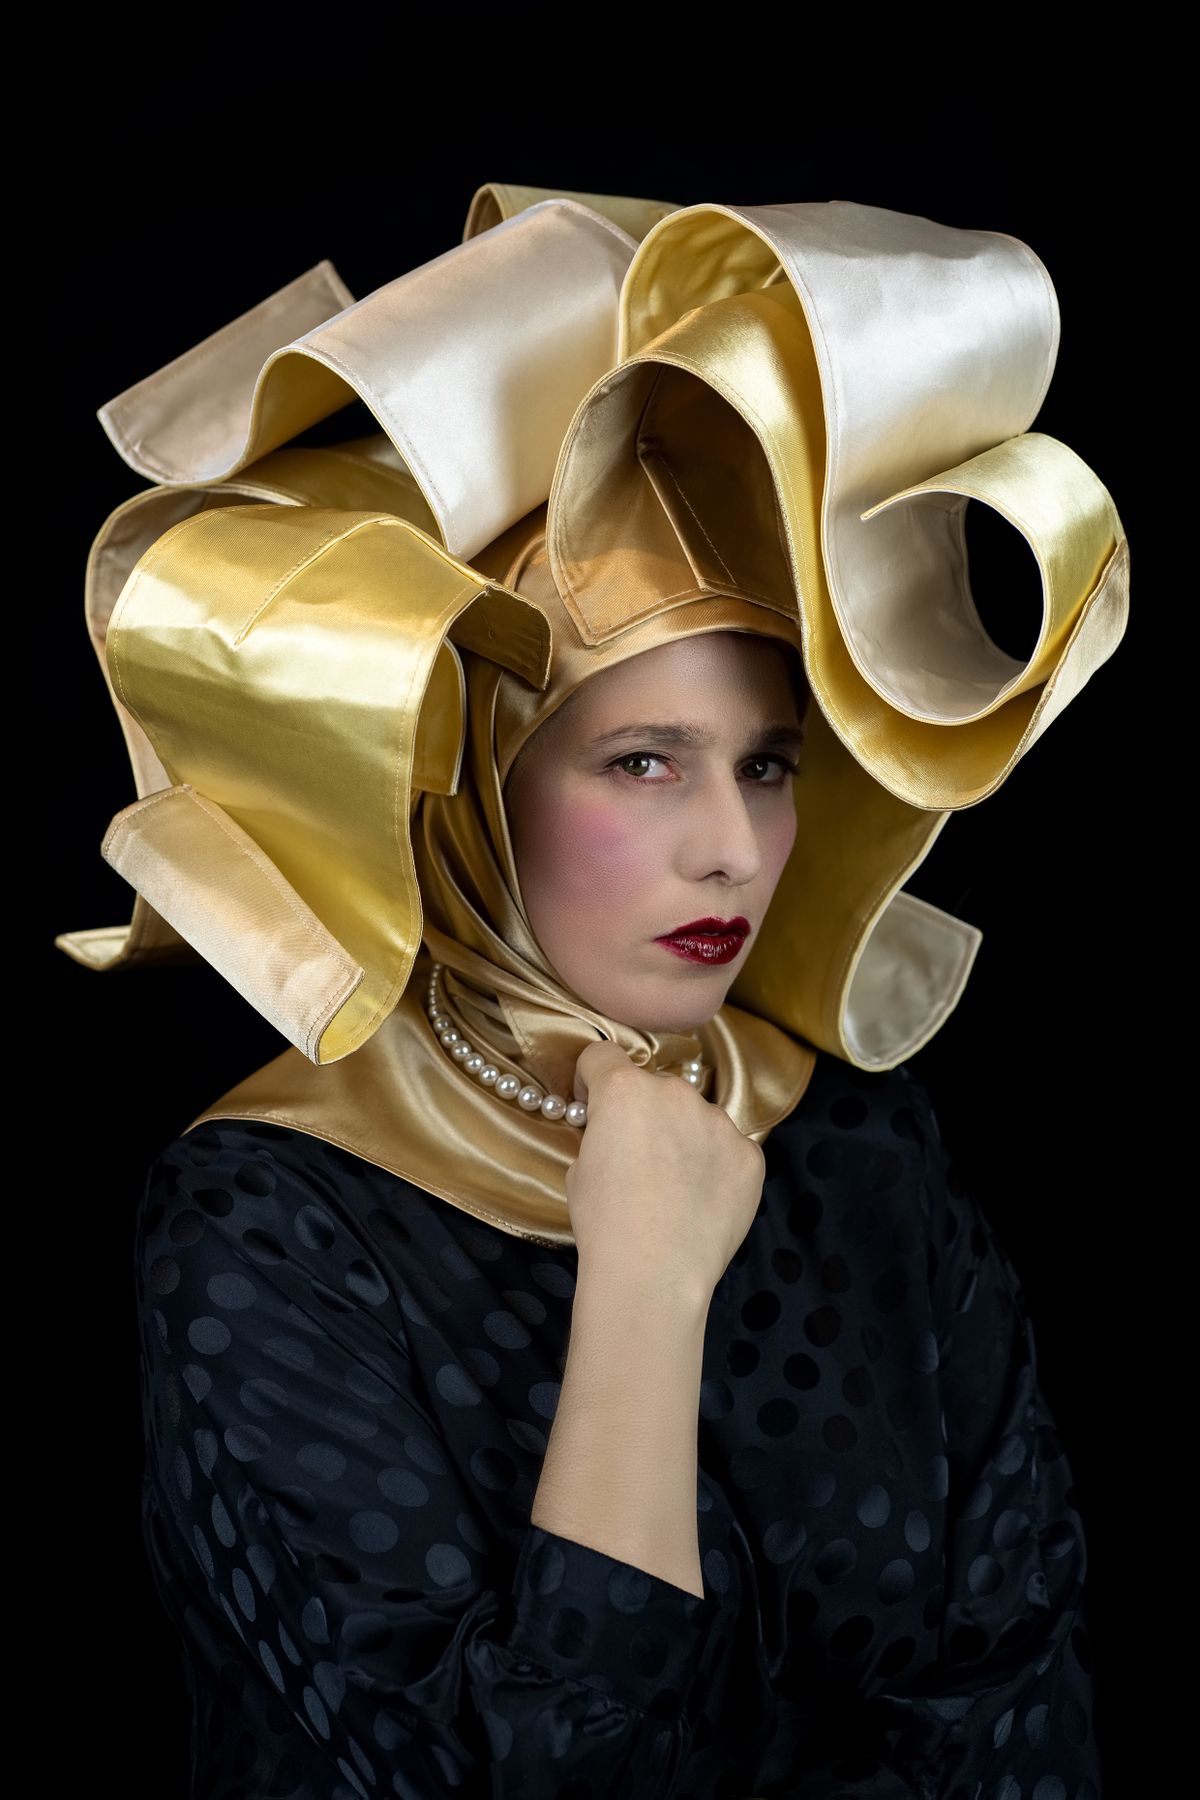 An image of a woman wearing an elaborate gold headers looking directly at the camera.